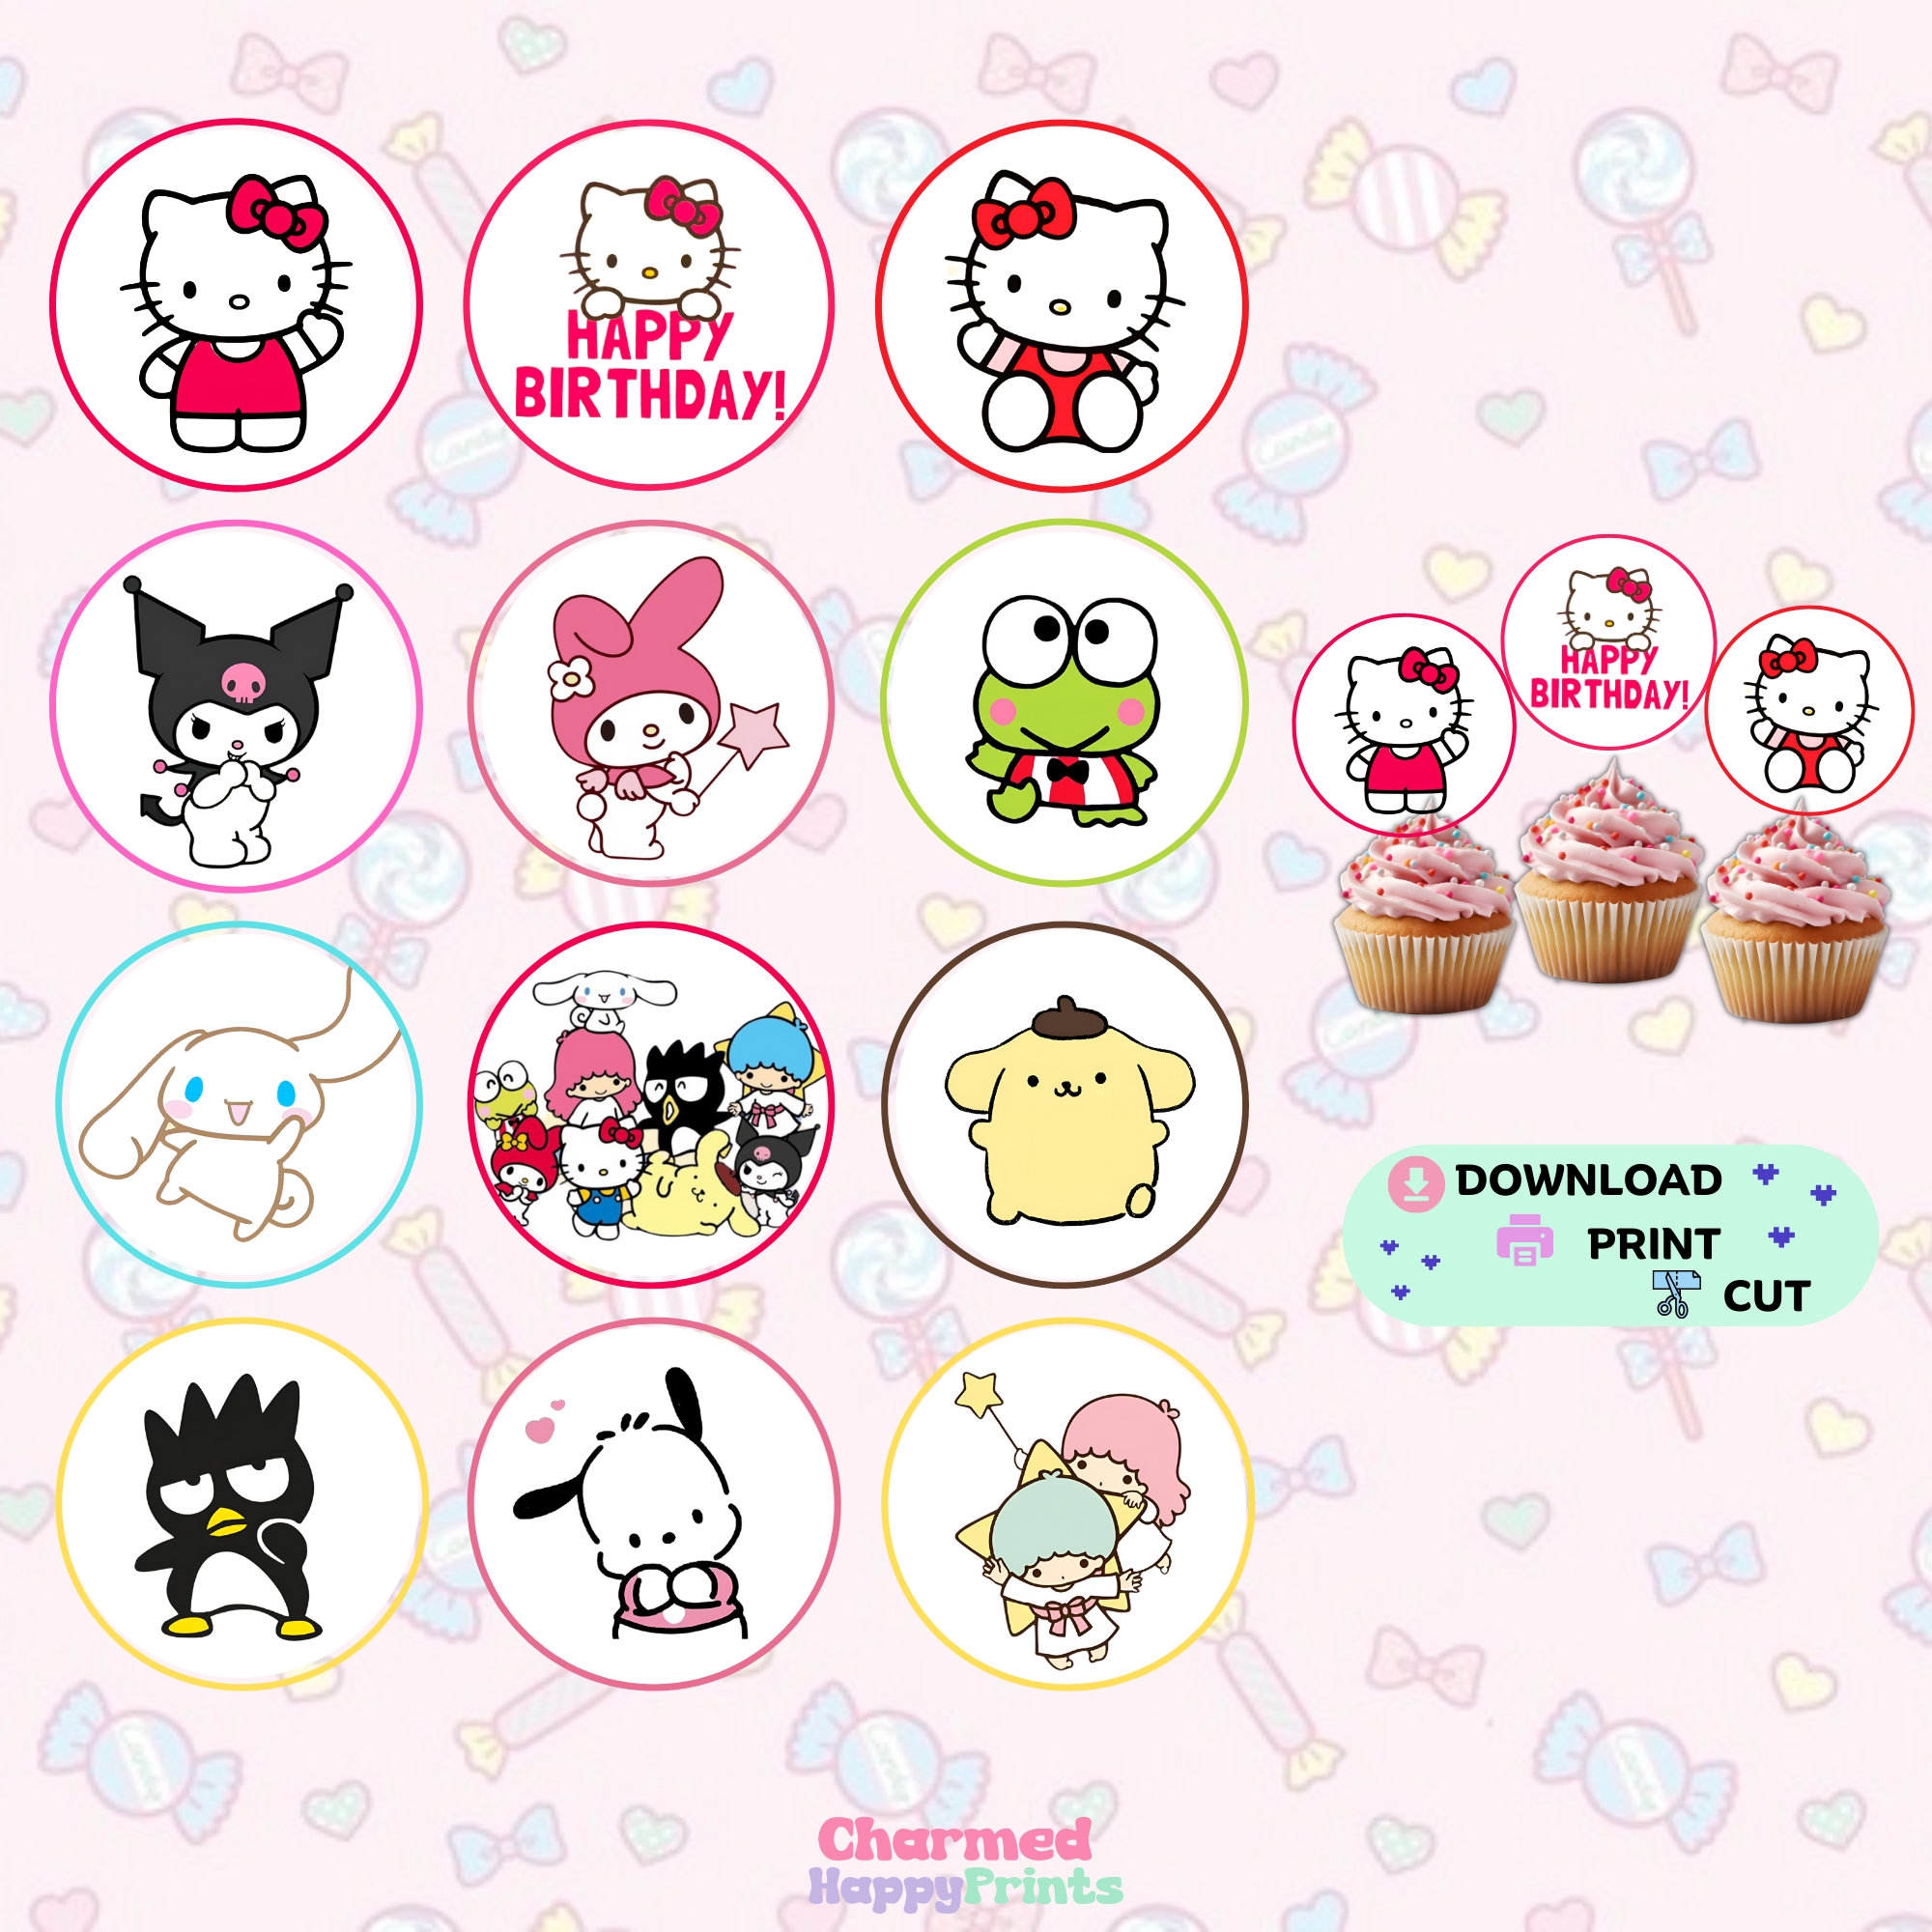 Kitty Cupcake Topper Kitty And Friends Cupcake Toppers Kawaii Characters Cupcake Toppers Kitty Digital Cupcake Toppers Cupcake Kitty Topper Etsy